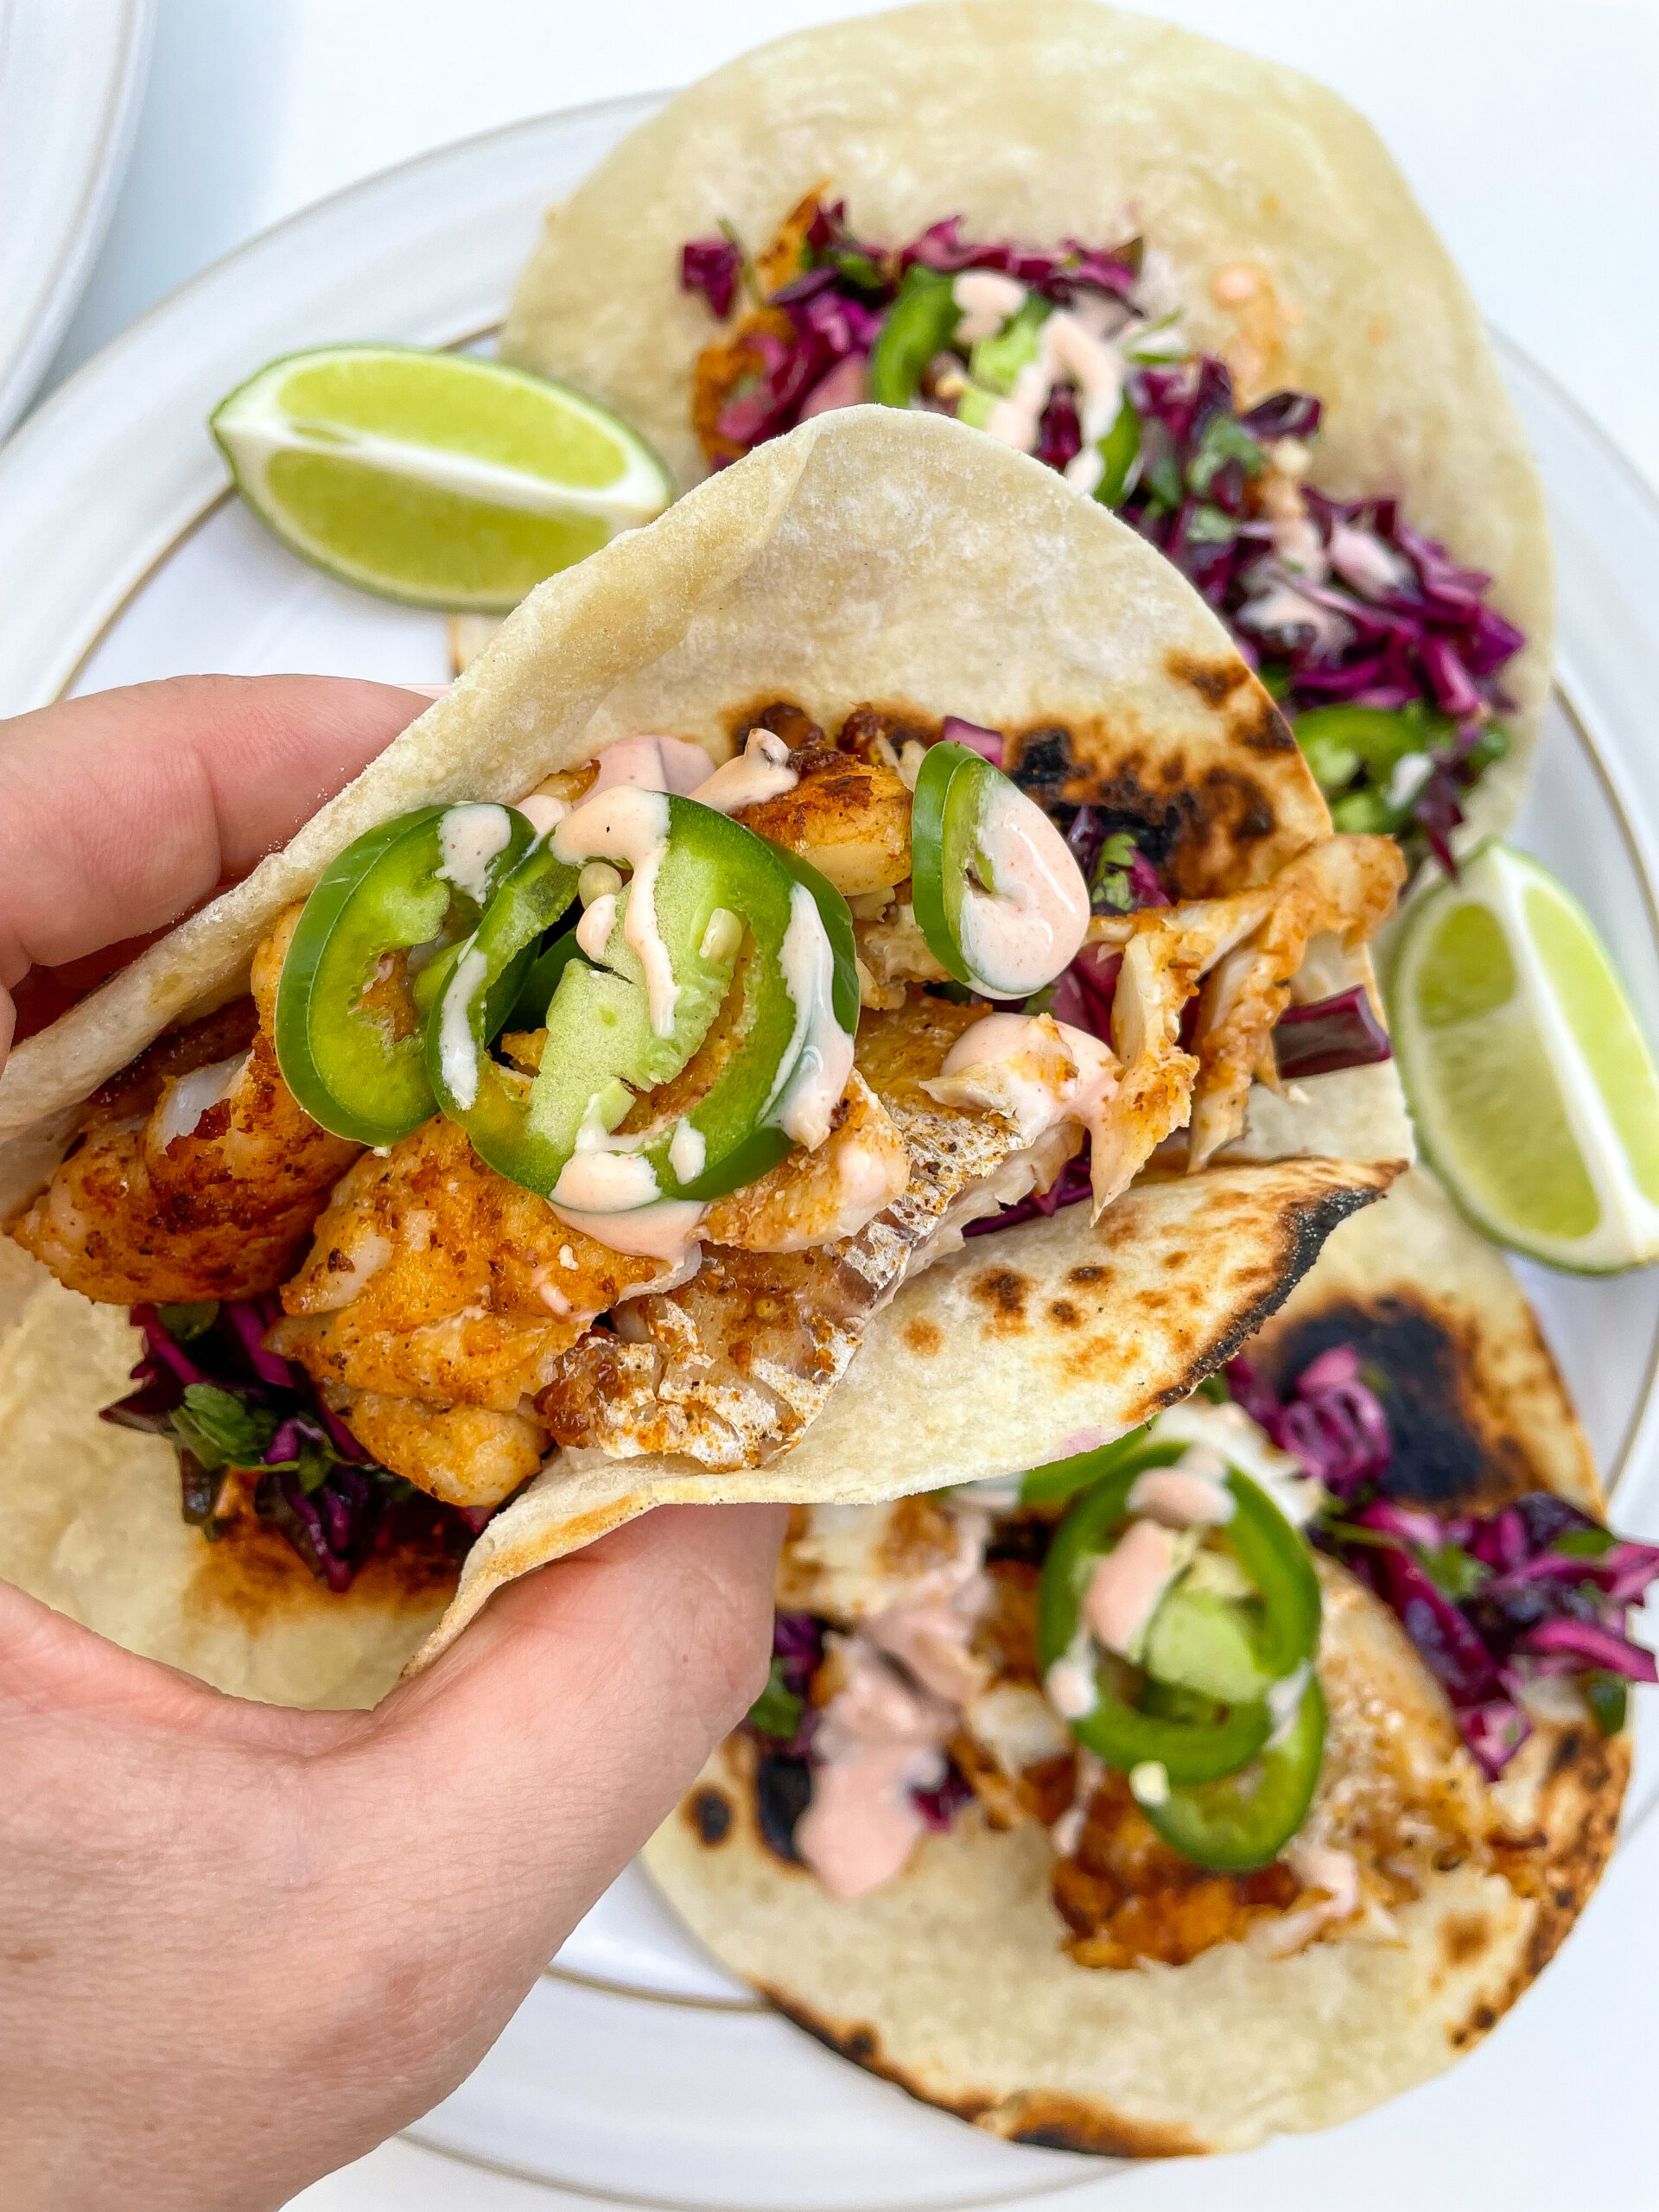 Fish Tacos with Red Cabbage Slaw